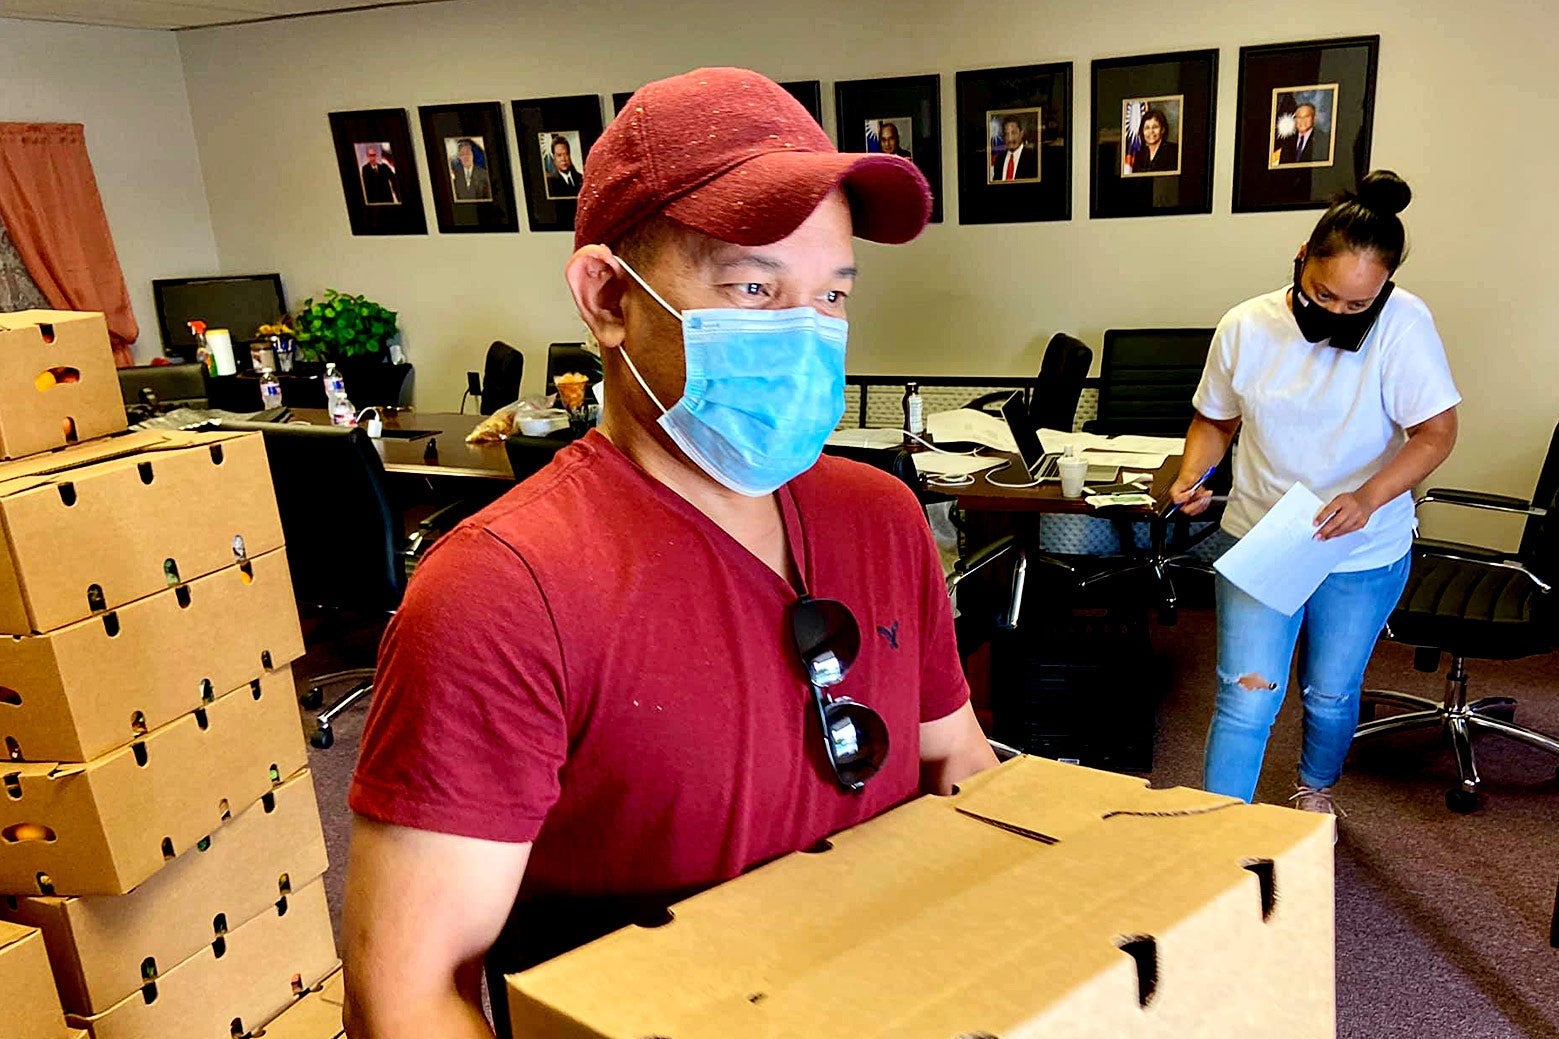 A man in a mask, red T-shirt, and red ball cap carries a cardboard box.